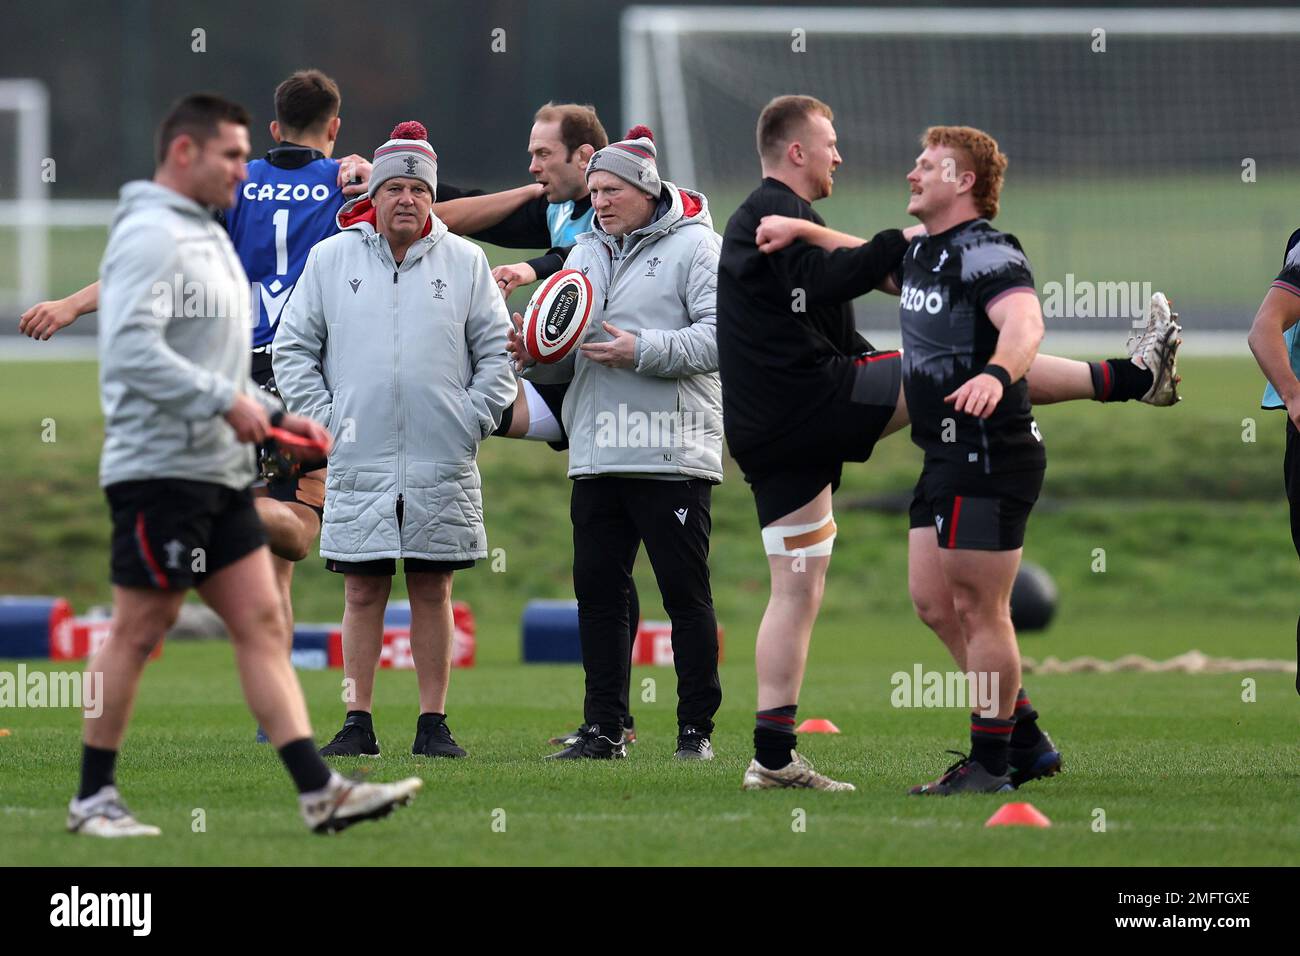 Cardiff, UK. 25th Jan, 2023. Warren Gatland, the head coach of Wales rugby team (2 l) looks on during the Wales rugby training session, Vale of Glamorgan on Wednesday 25th January 2023. The team are preparing for this years Guinness Six nations championship . pic by Andrew Orchard/Andrew Orchard sports photography/ Alamy Live News Credit: Andrew Orchard sports photography/Alamy Live News Stock Photo